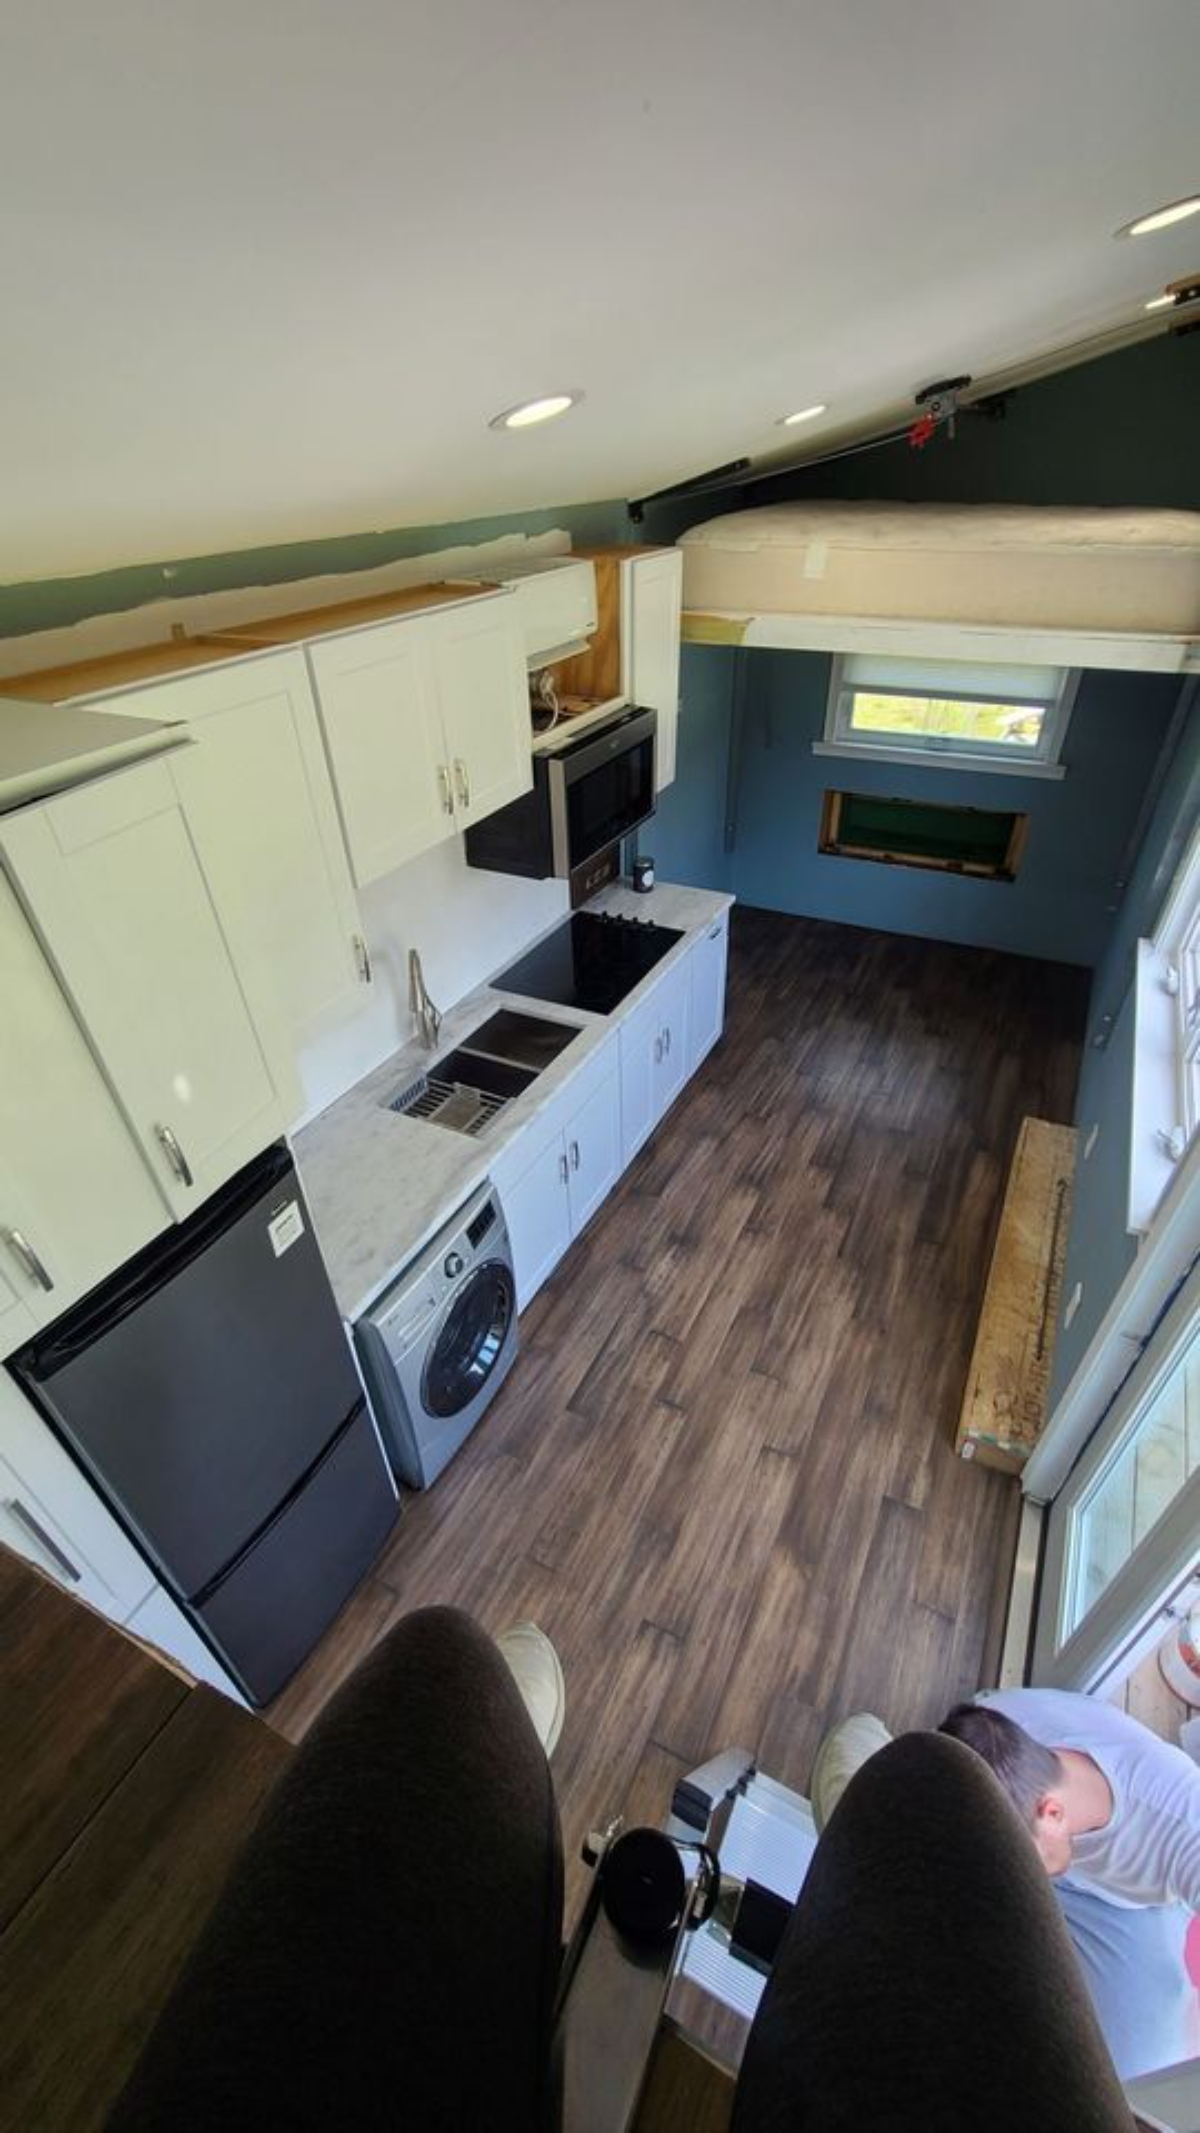 Kitchen area view from the loft of 24' Tiny Home